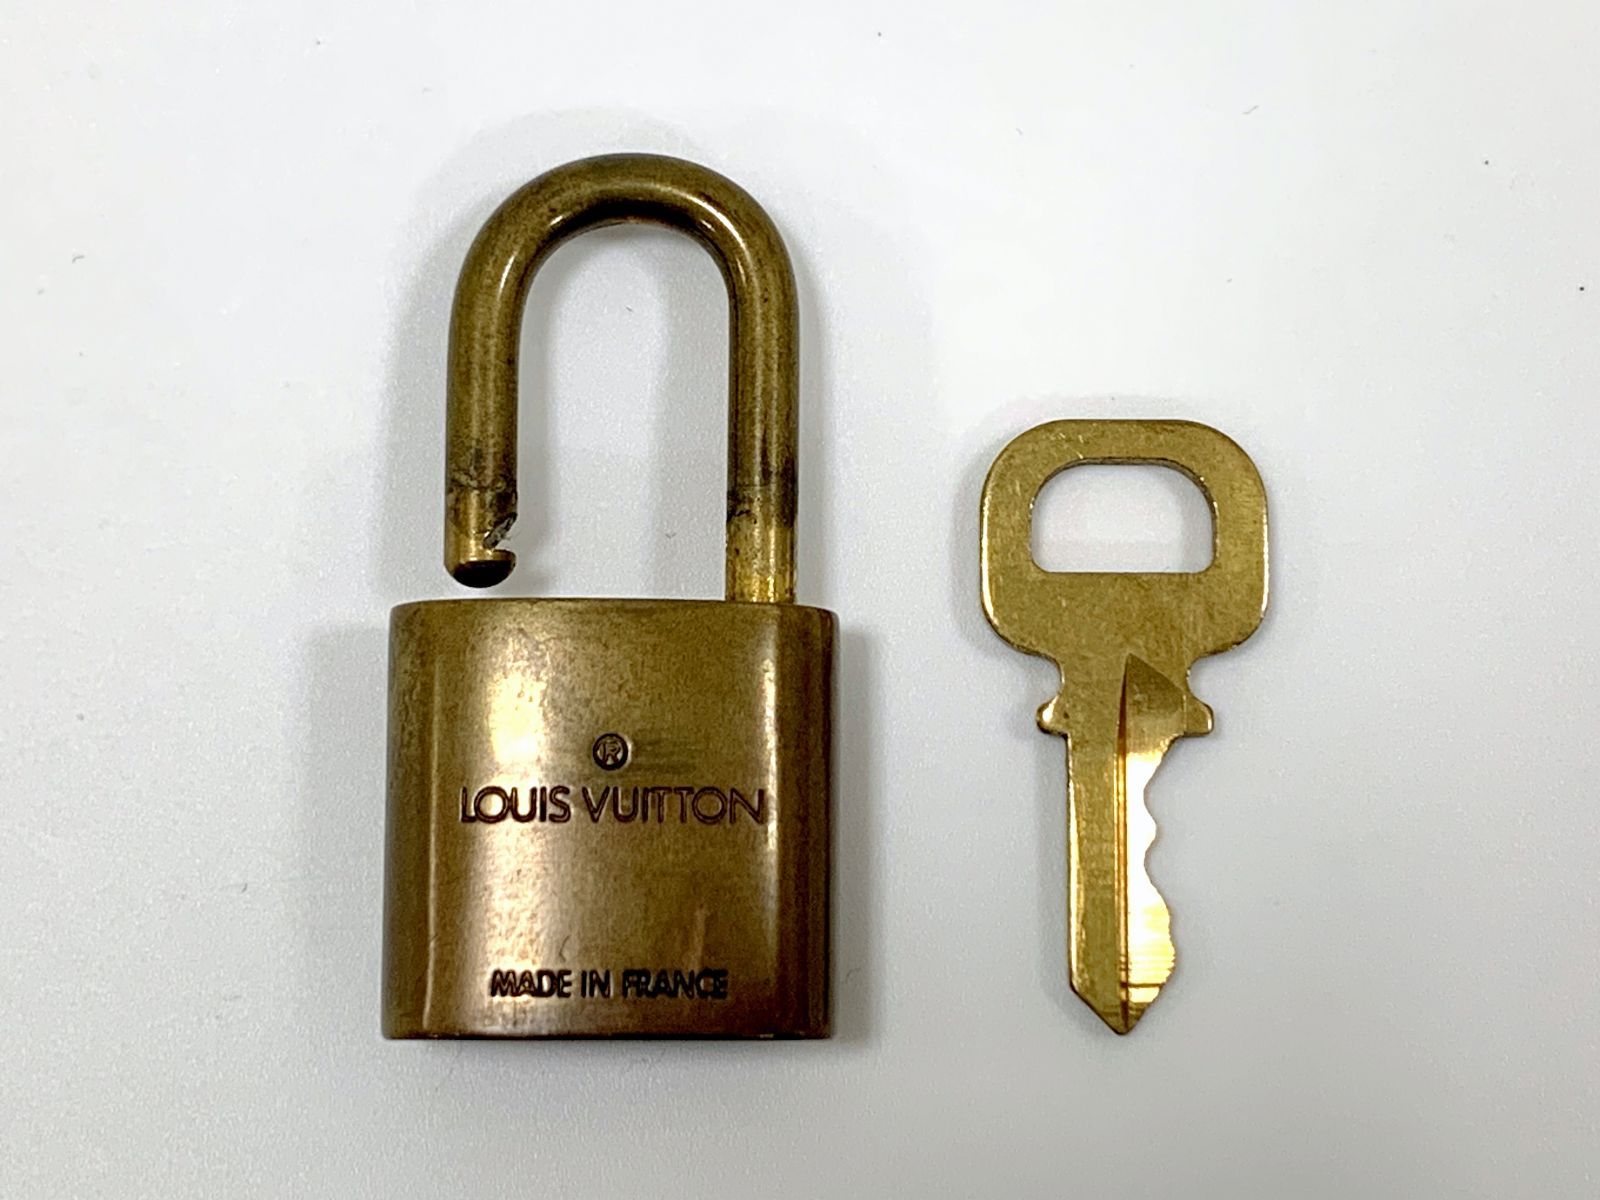 Authentic LOUIS VUITTON Lock And Key Set Padlock Made In France,no319